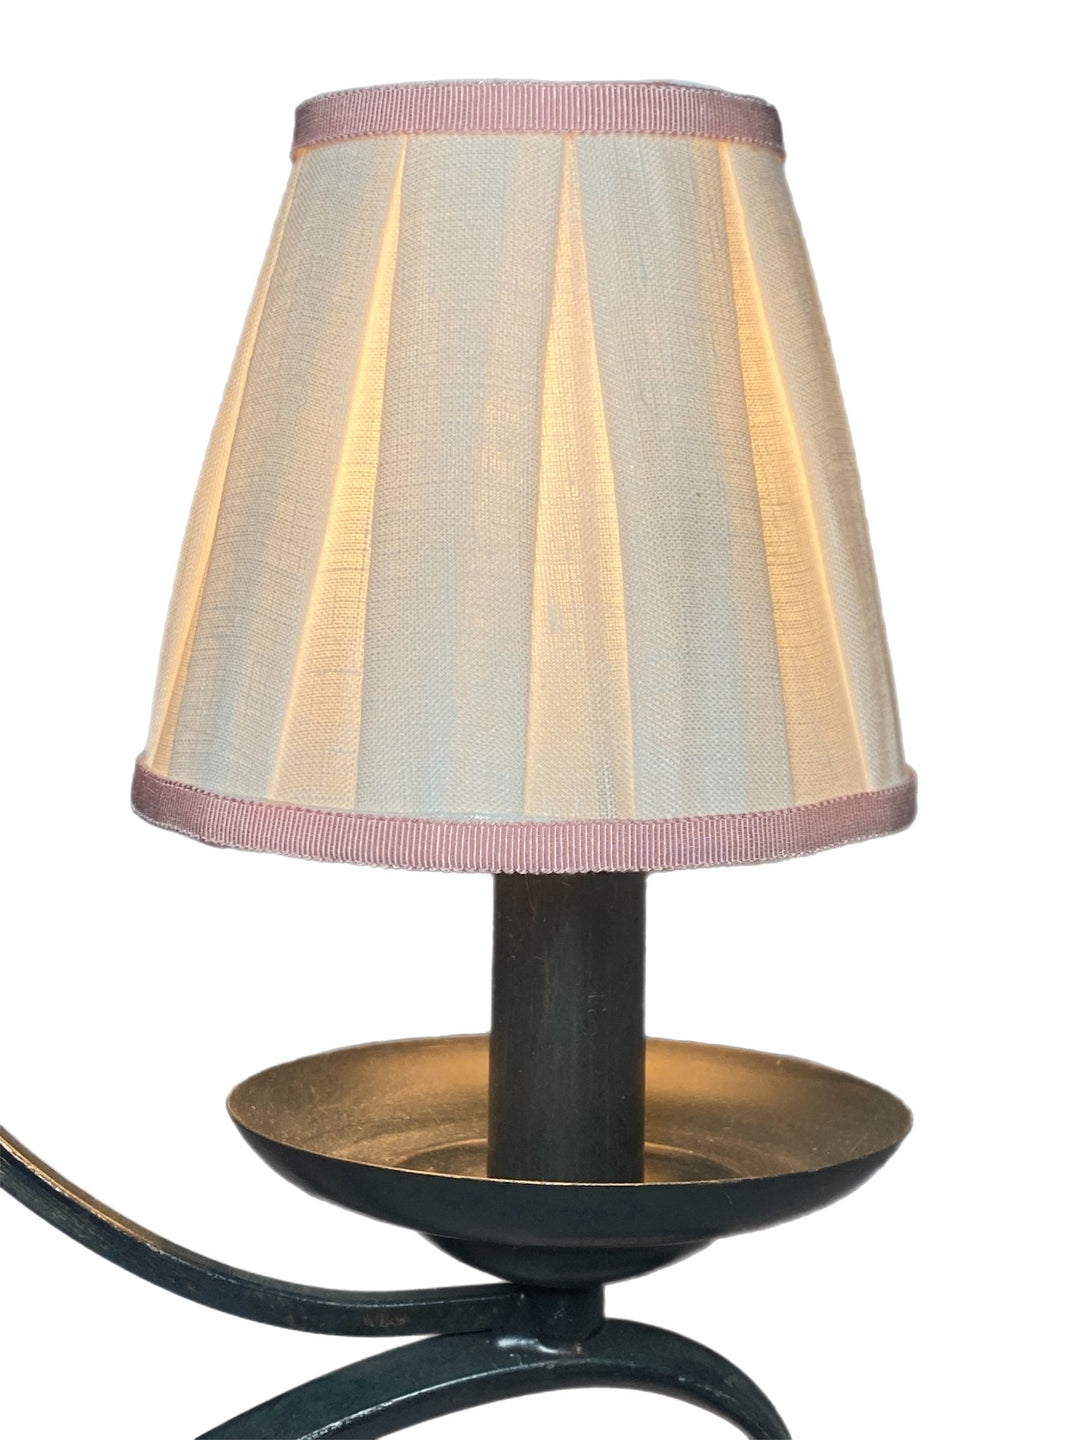 Box Pleat Linen - Empire Chandelier Shade - Available in Three Sizes + Add Custom Trim - Lux Lamp Shades